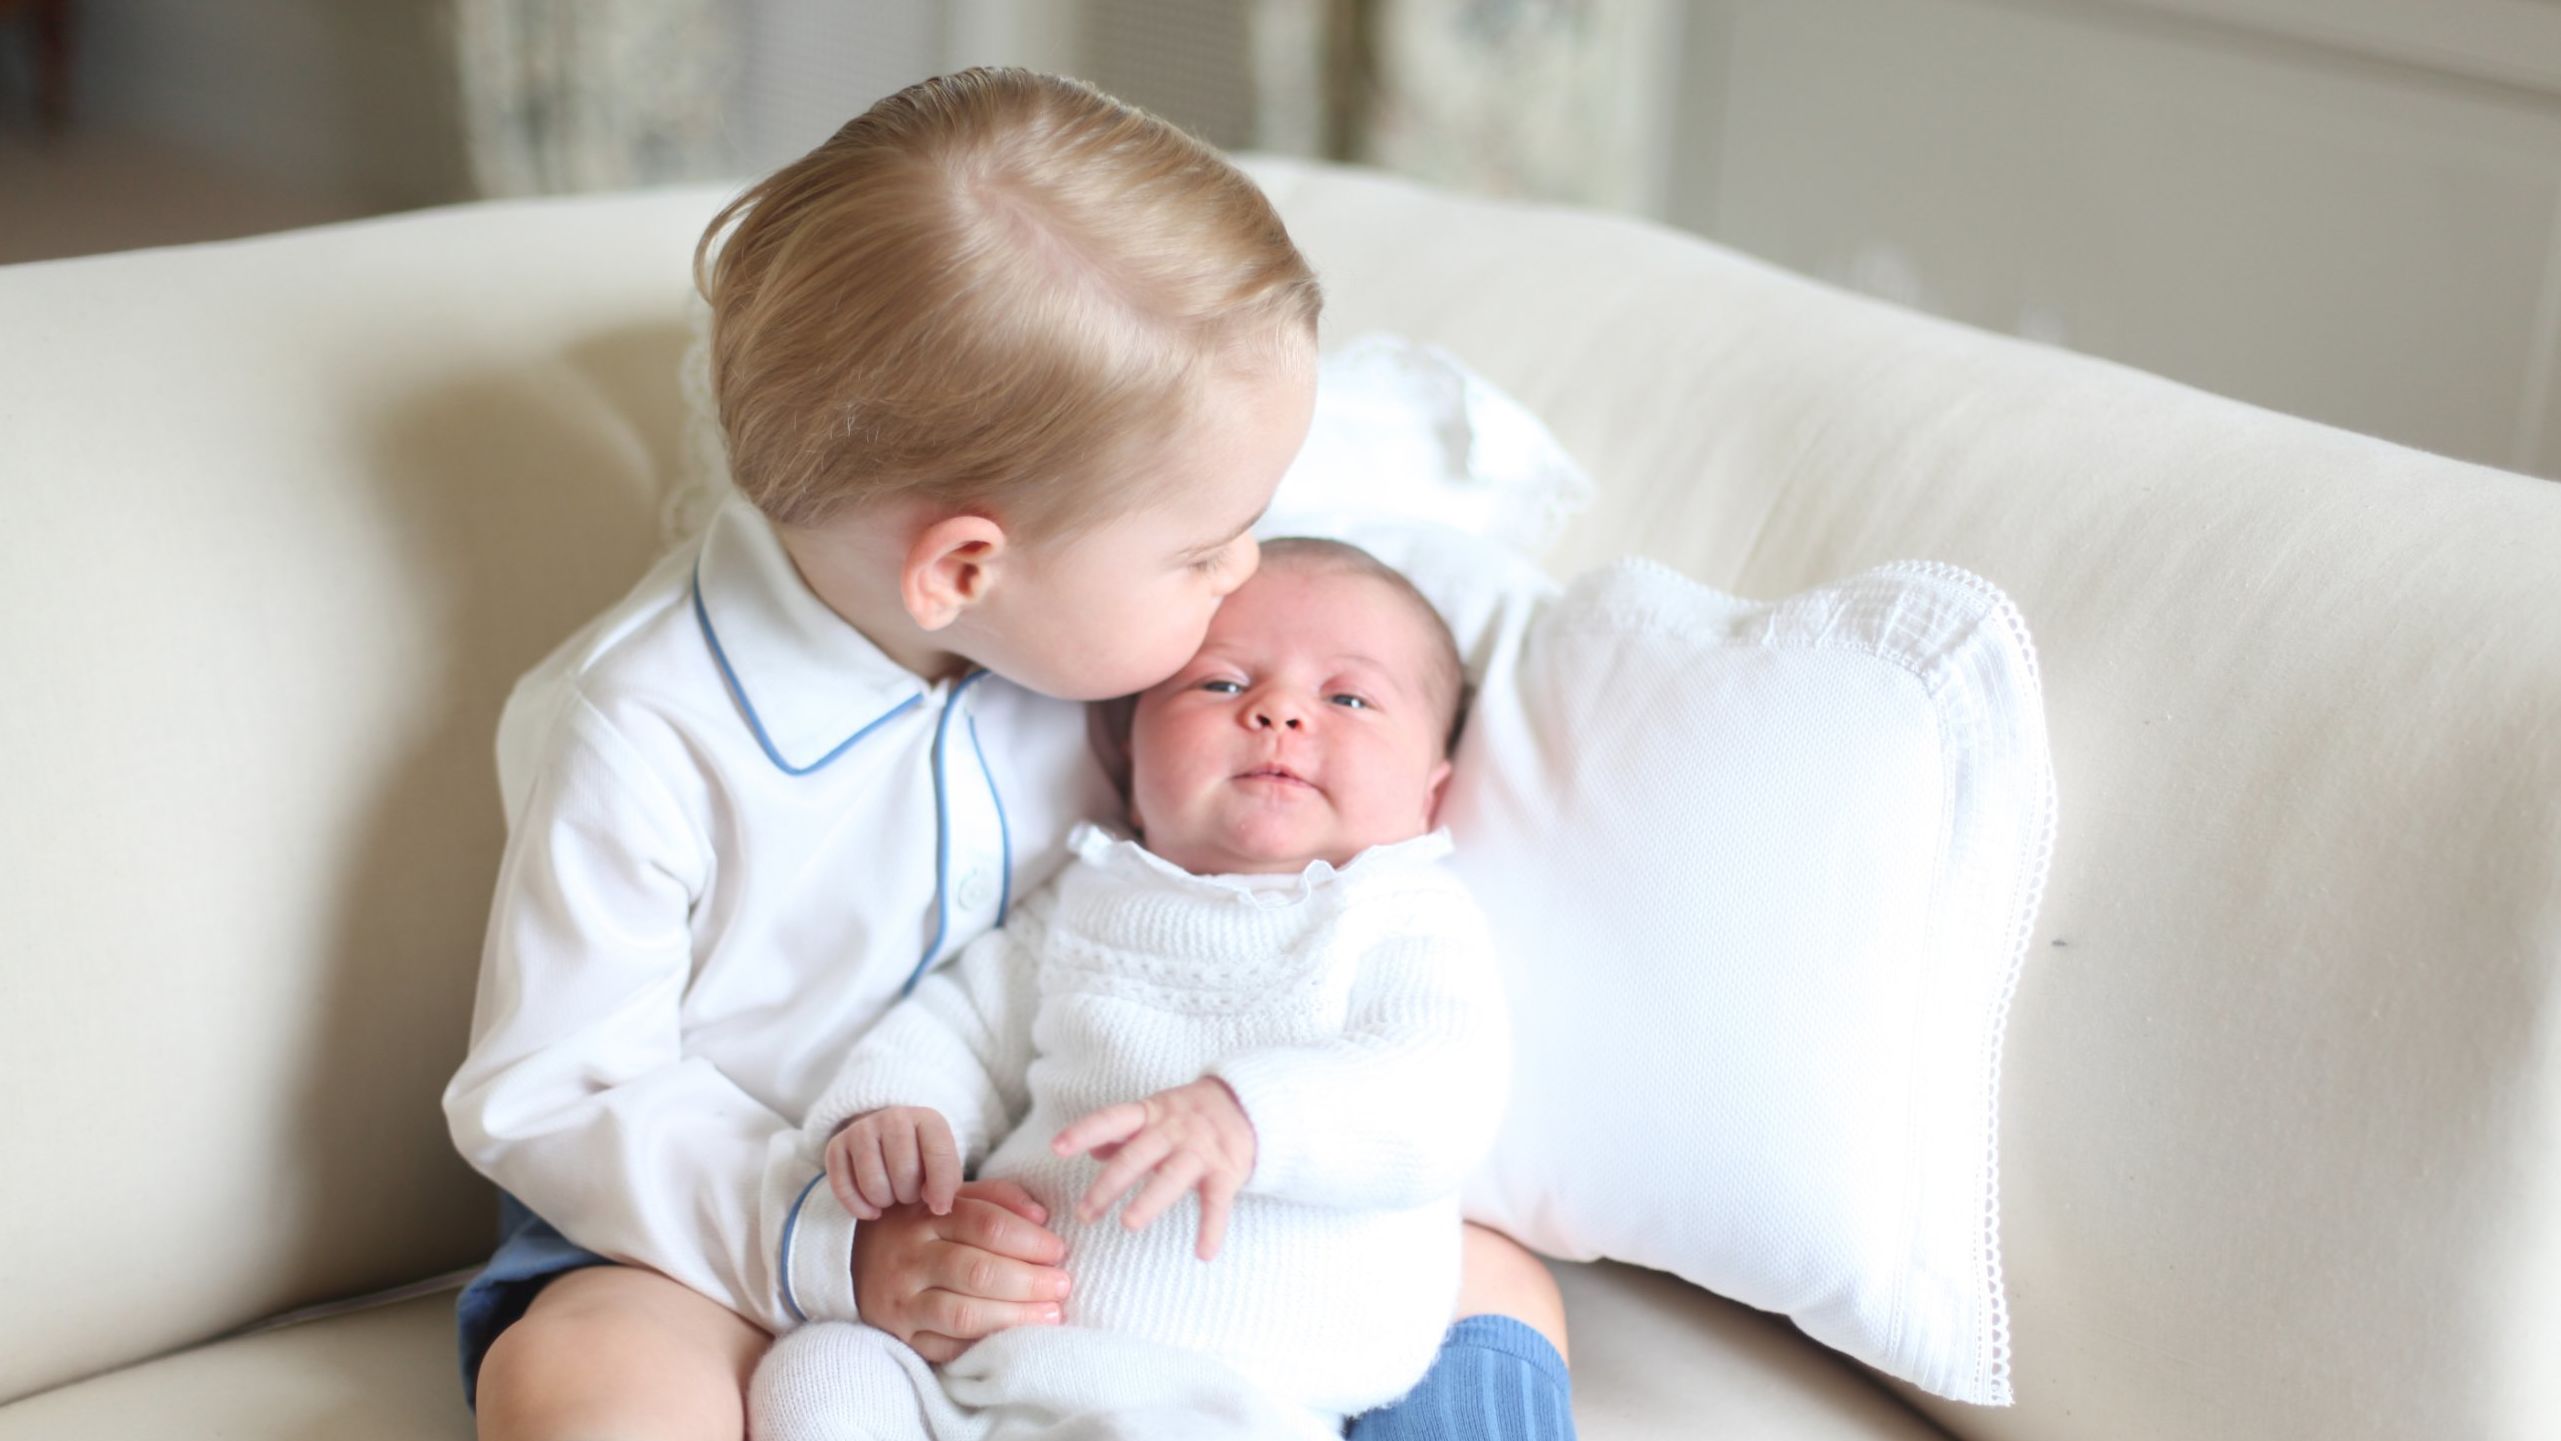 Princess Charlotte is seen with her big brother for the first time in this photo released by Kensington Palace in June 2015.